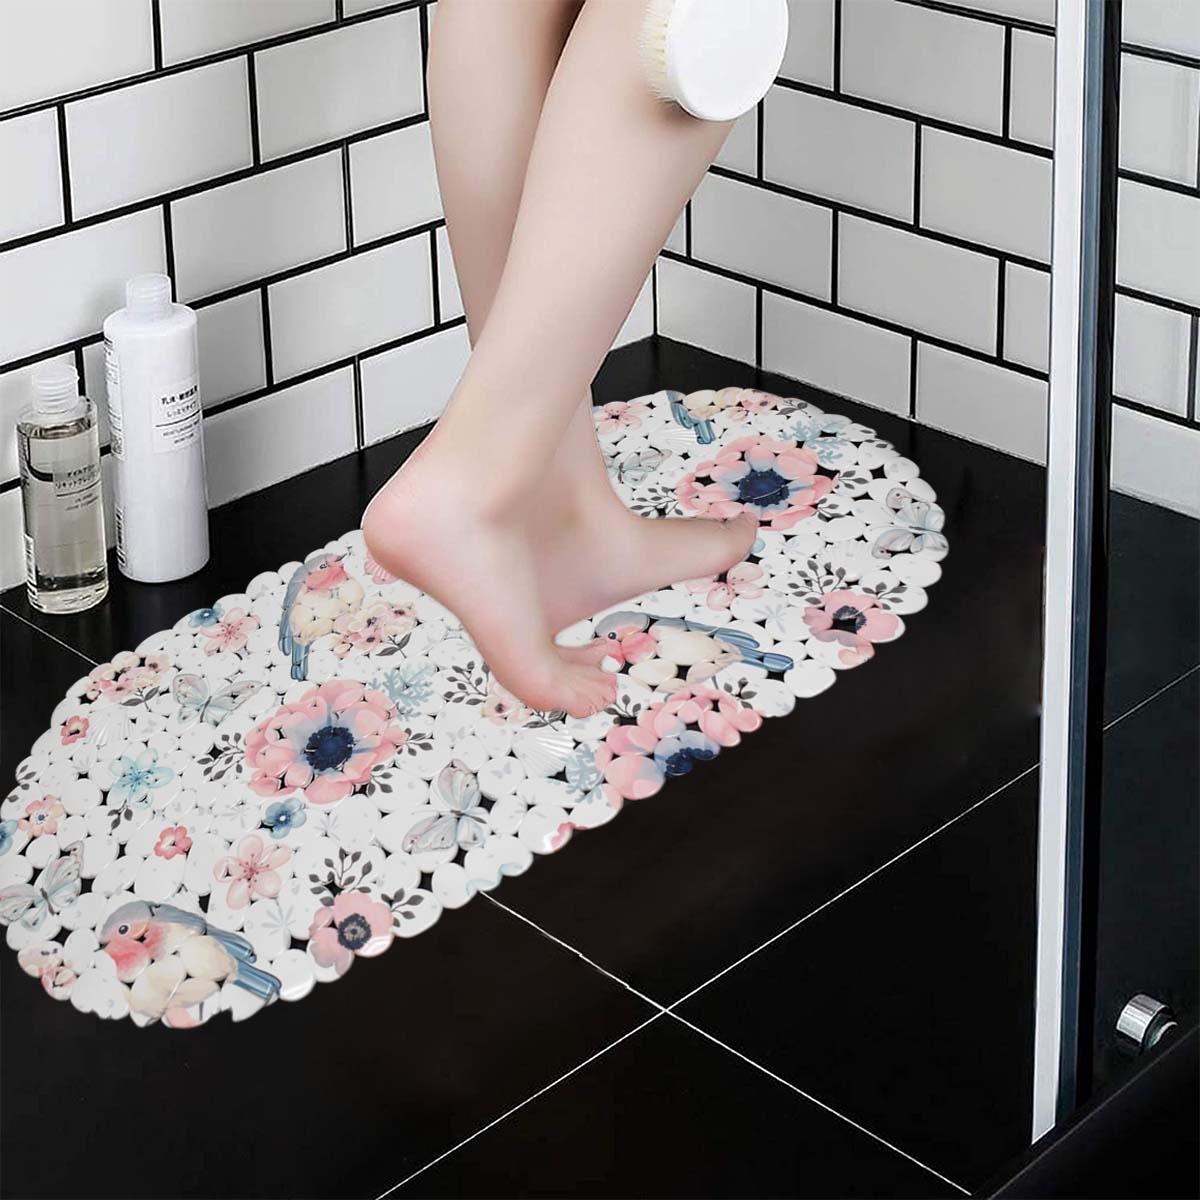 Kookee PVC Bath Mat Non-Slip Pebble Bathtub Mat L=69cm x W=35cm (for Smooth/Non-Textured Tubs Only) Safe Shower Mat with Drain Holes, Suction Cups for Bathroom (15-4935)